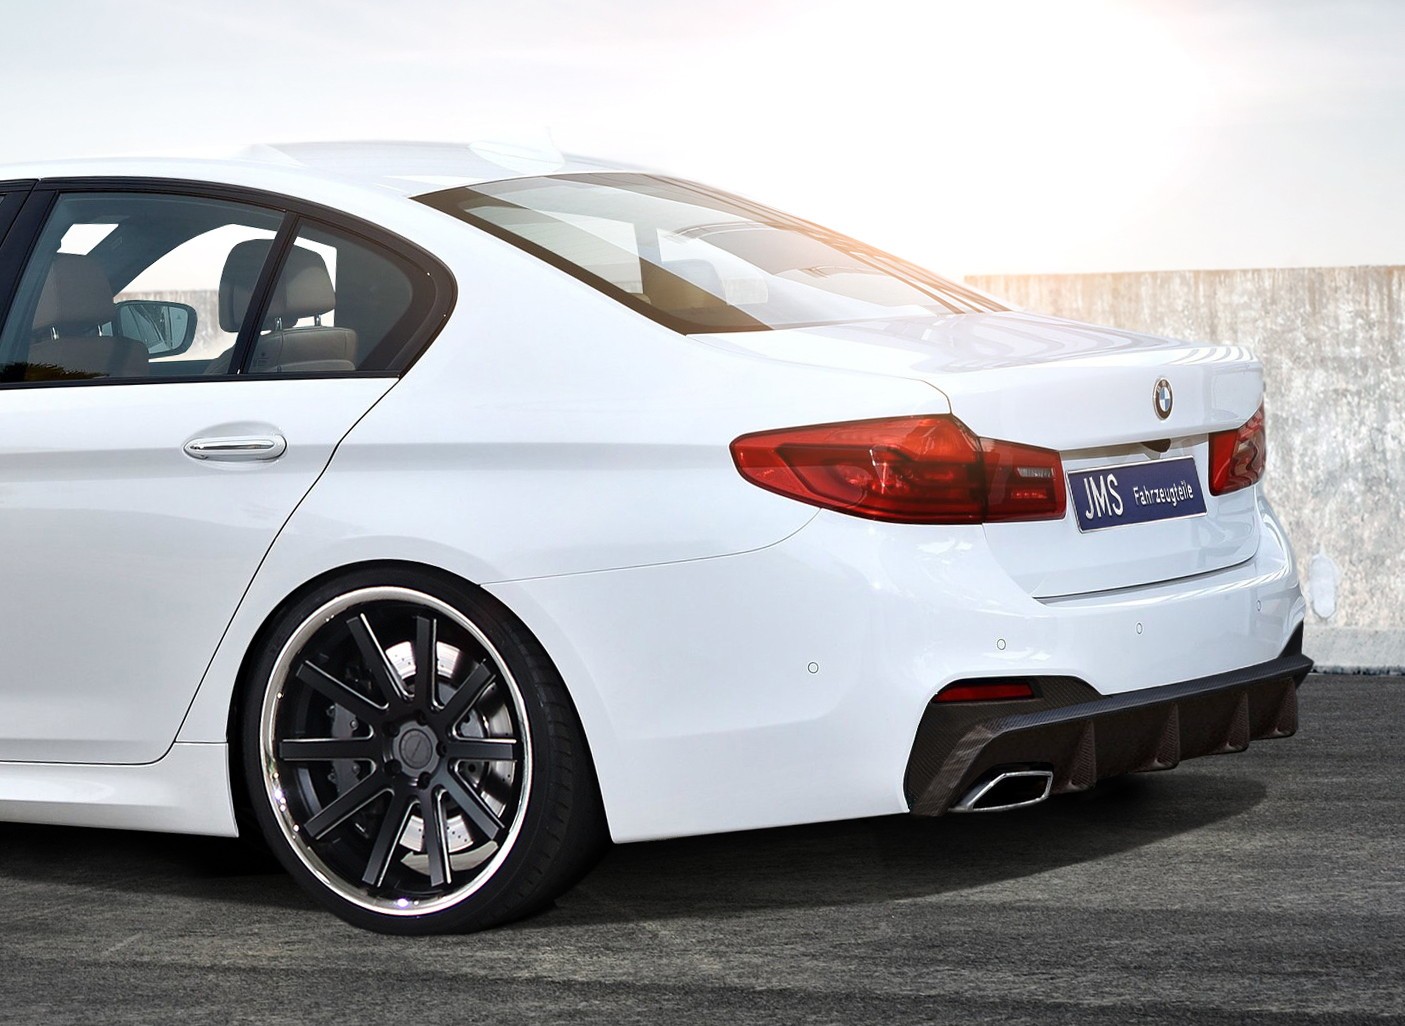 New BMW 5-Series G31 Puts On A Dahler Sports Suit